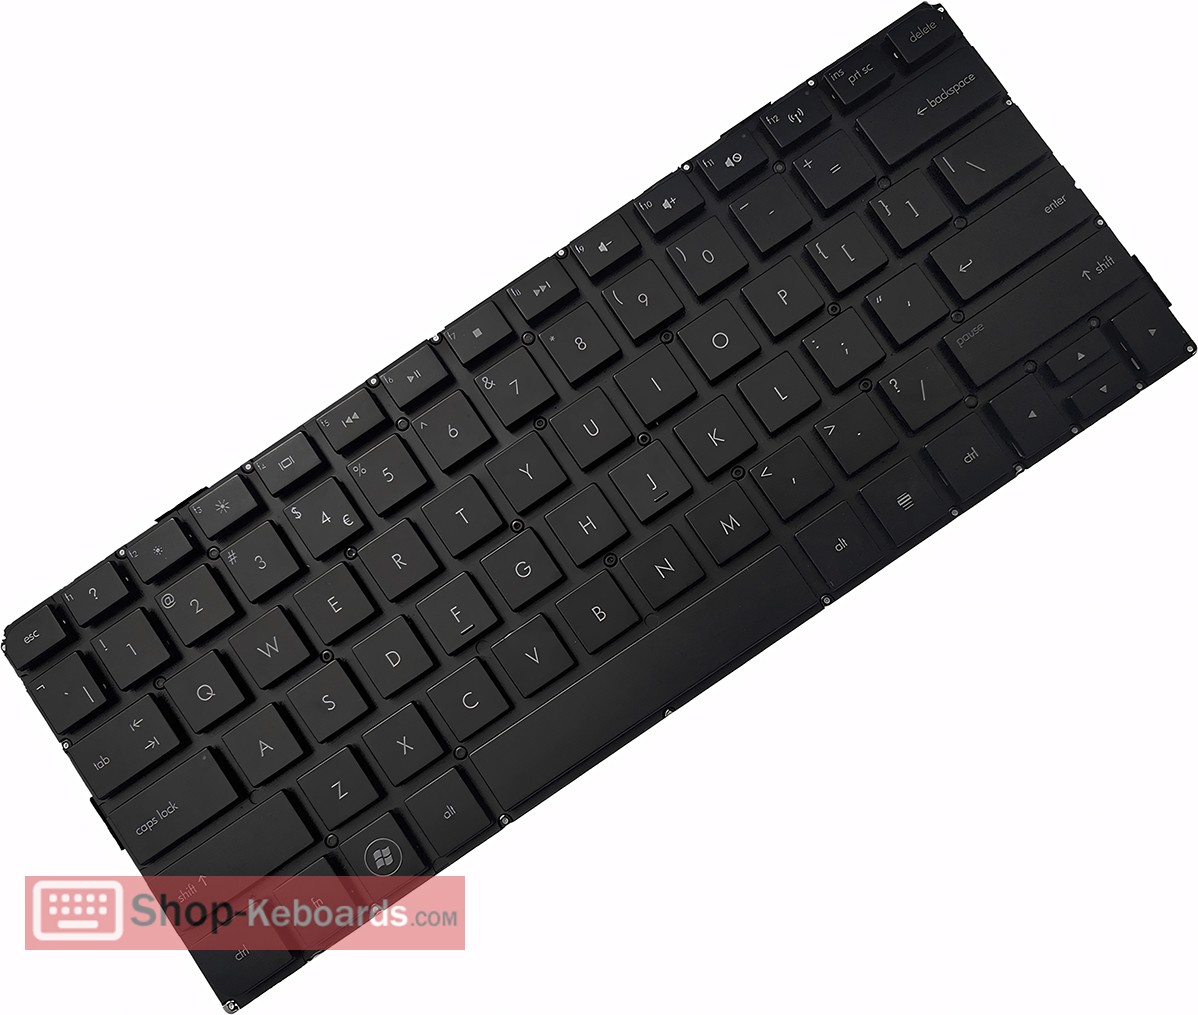 HP ENVY 13-1060 SERIES Keyboard replacement